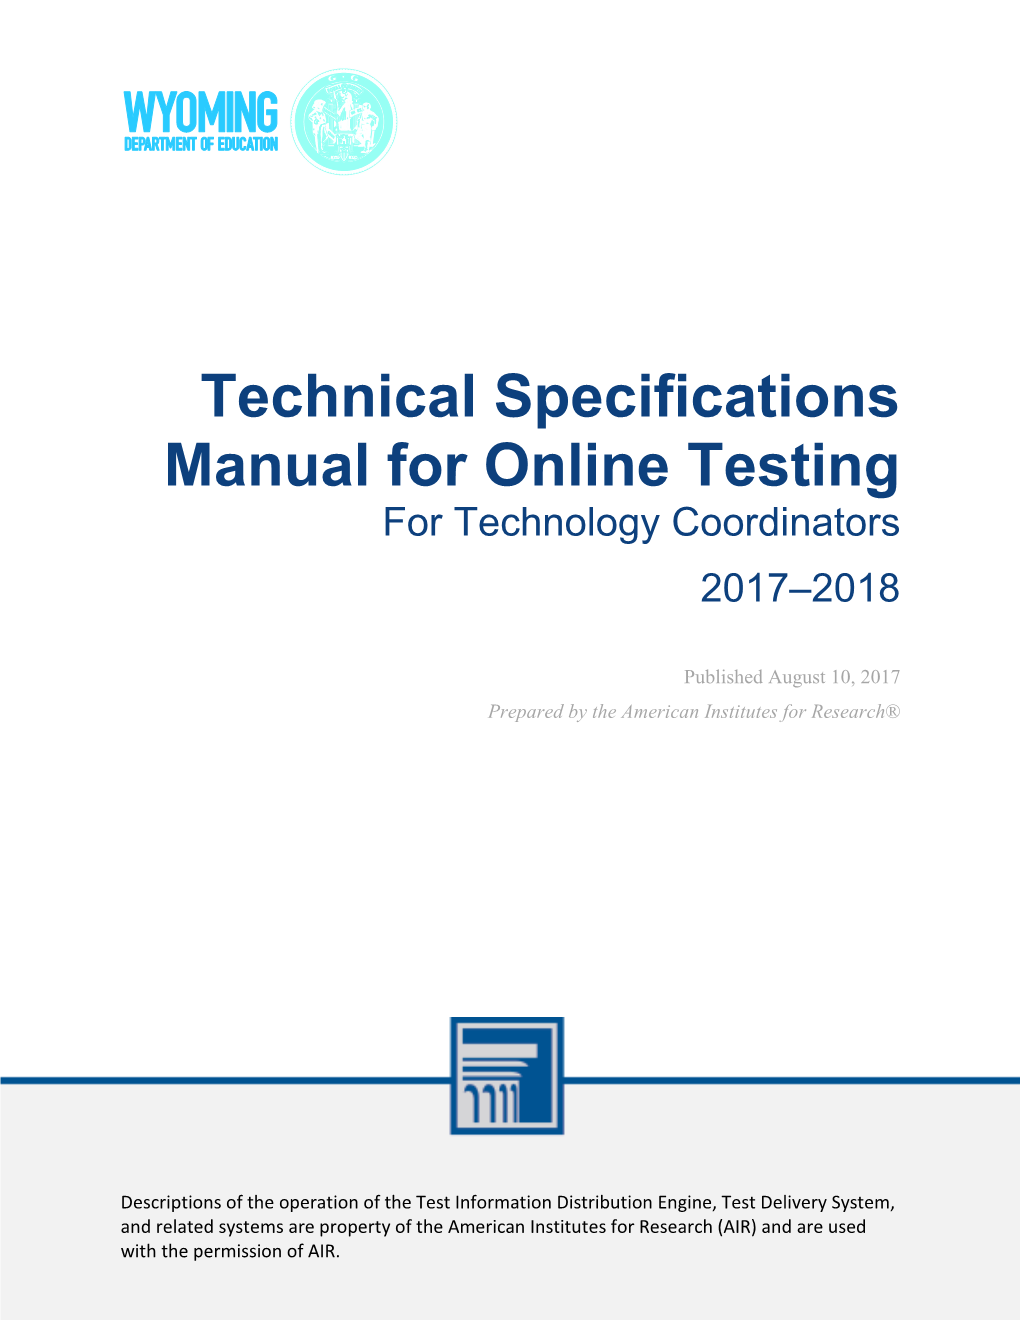 Technical Specifications Manual for Online Testing for Technology Coordinators 2017–2018